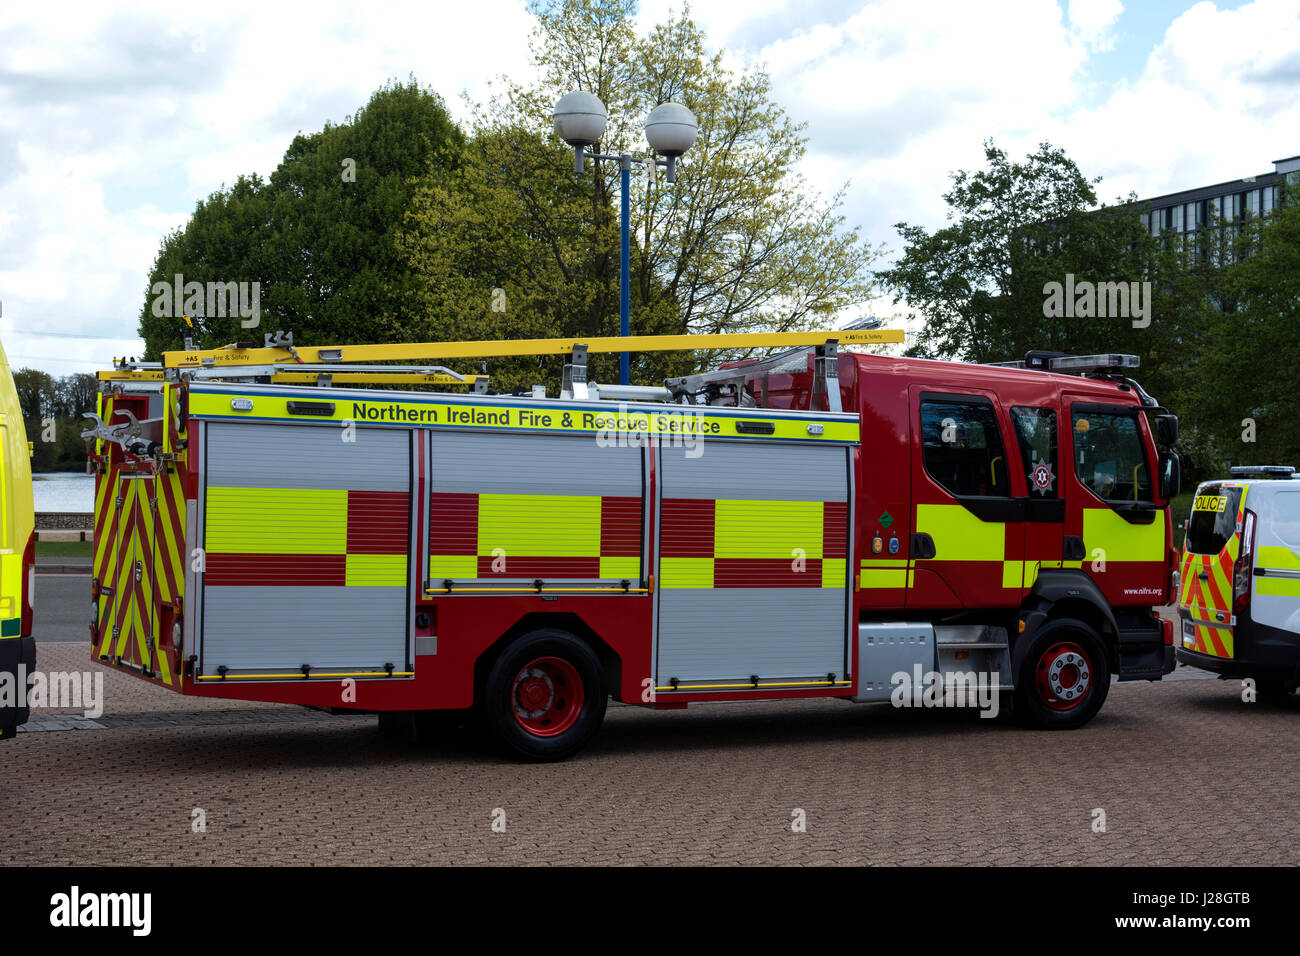 A Volvo Northern Ireland Fire and Rescue fire engine at the Commercial Vehicle Show, NEC, Birmingham, UK Stock Photo